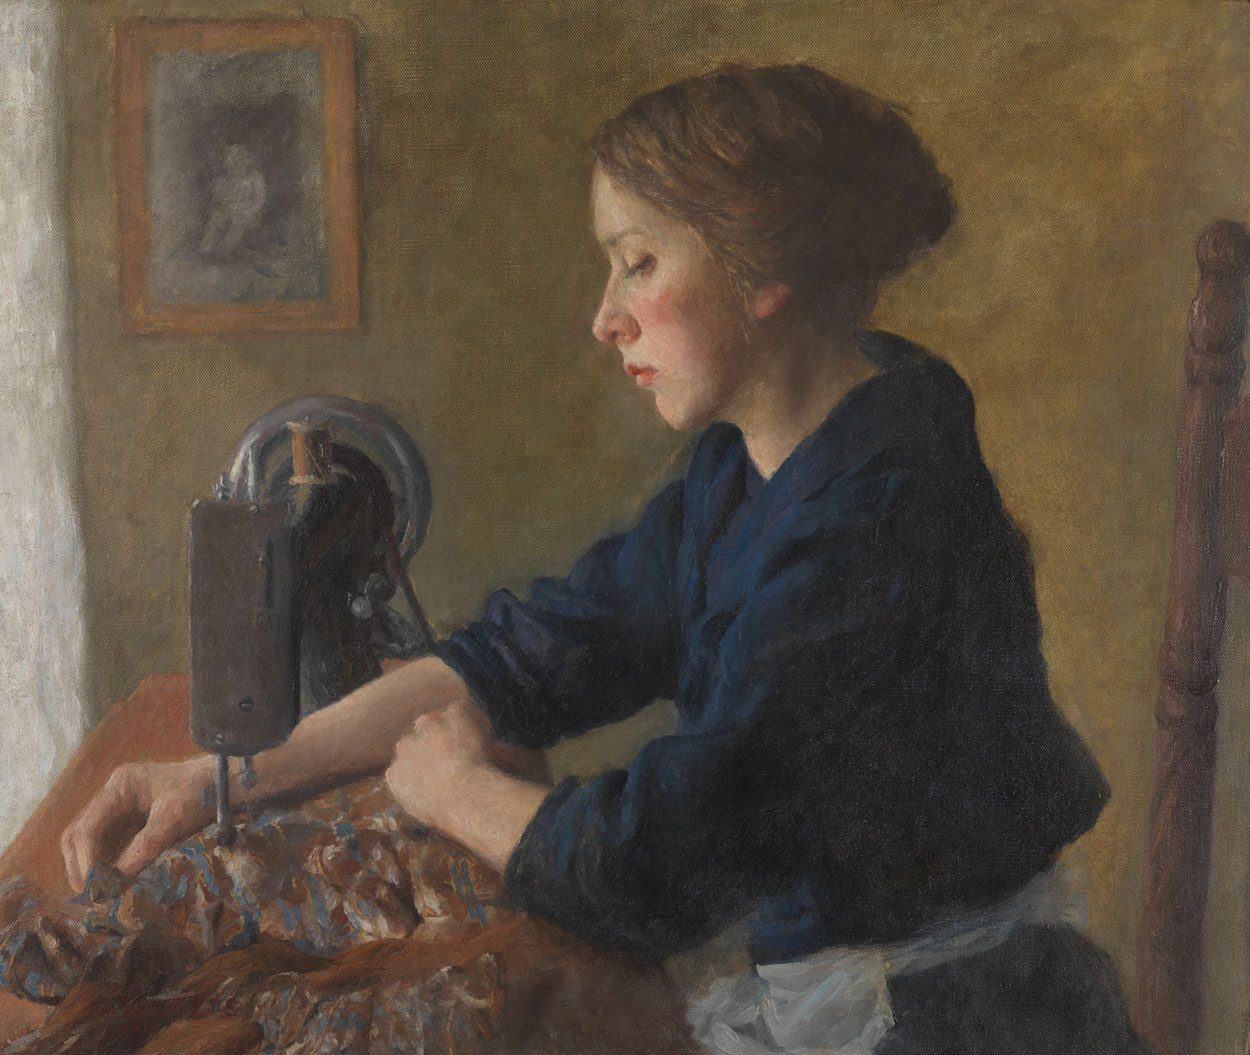 The Girl at the Sewing Machine